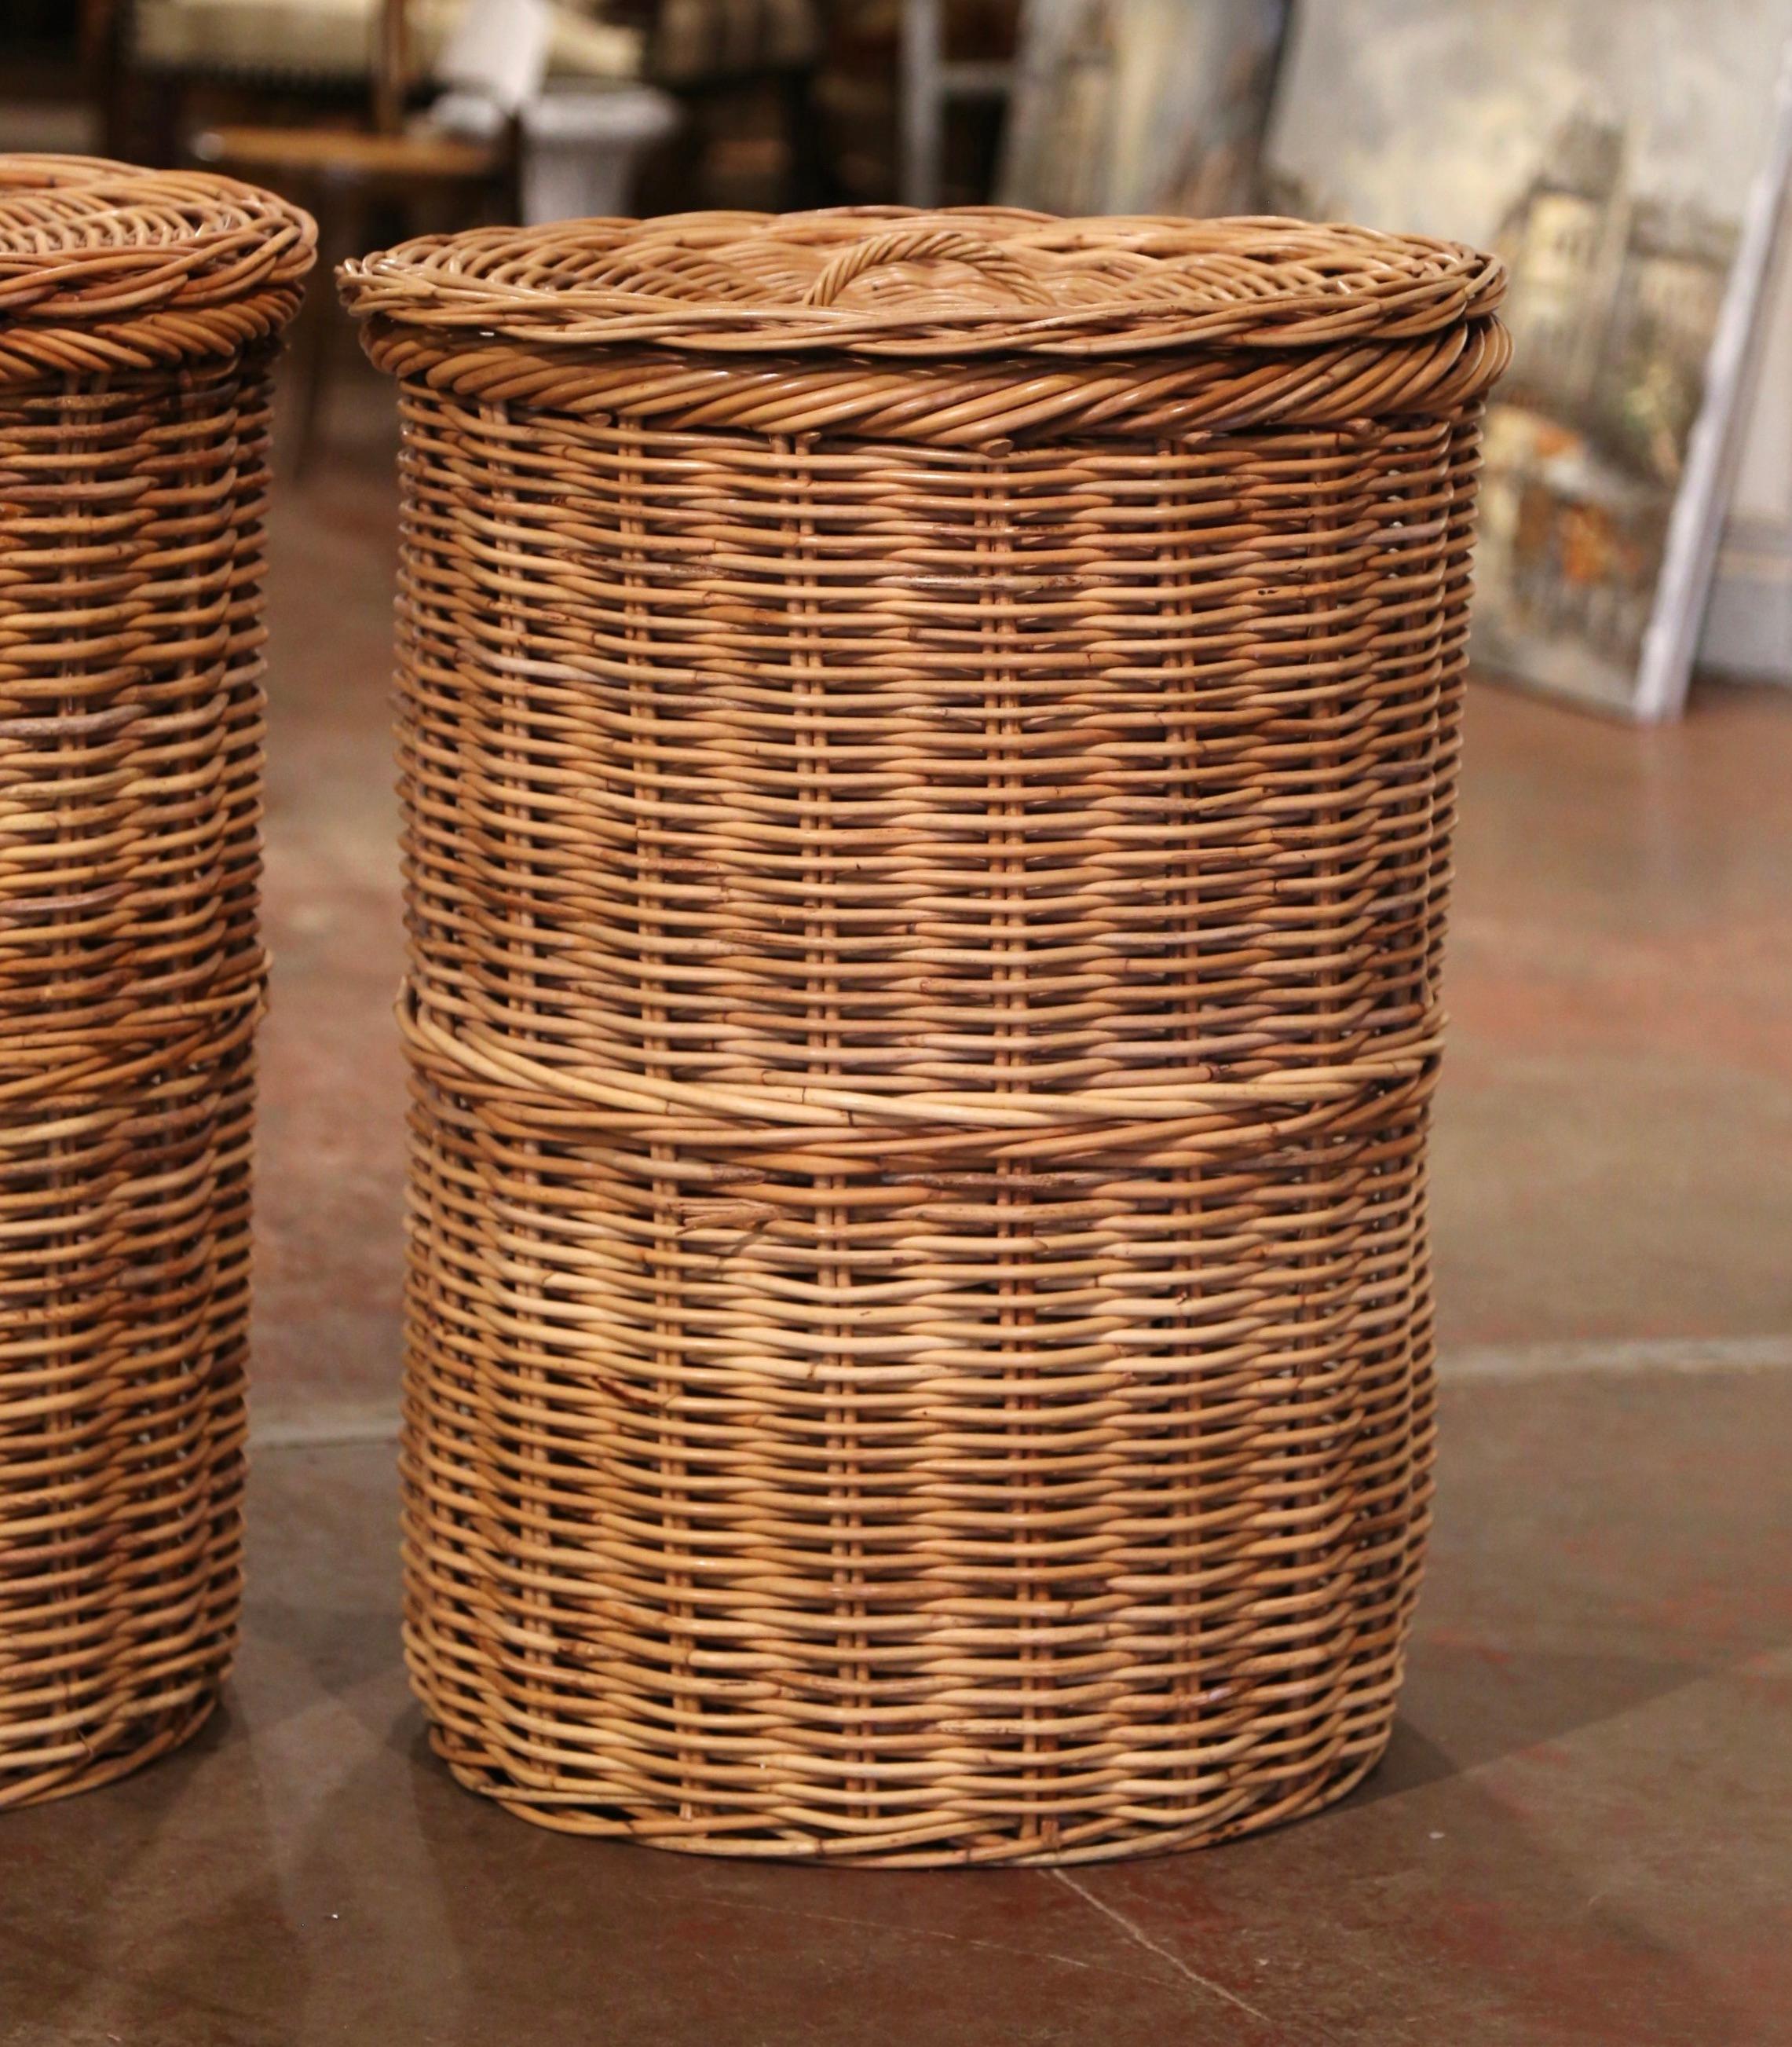 Country Pair of Mid-Century French Handwoven Wicker Baskets with Lids